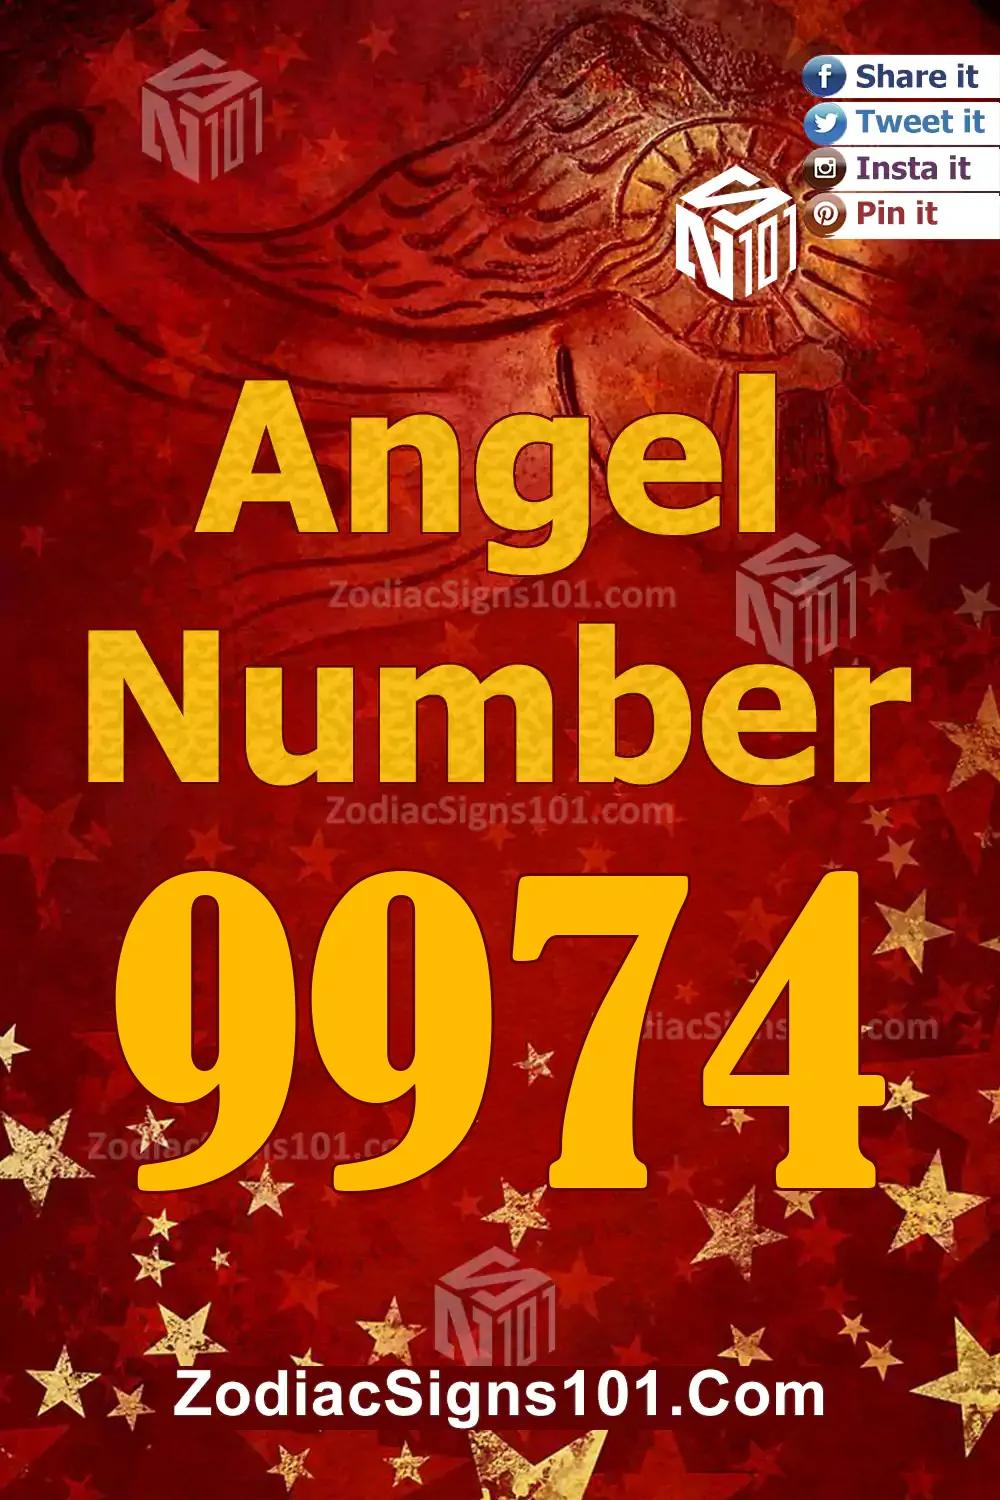 9974 Angel Number Meaning